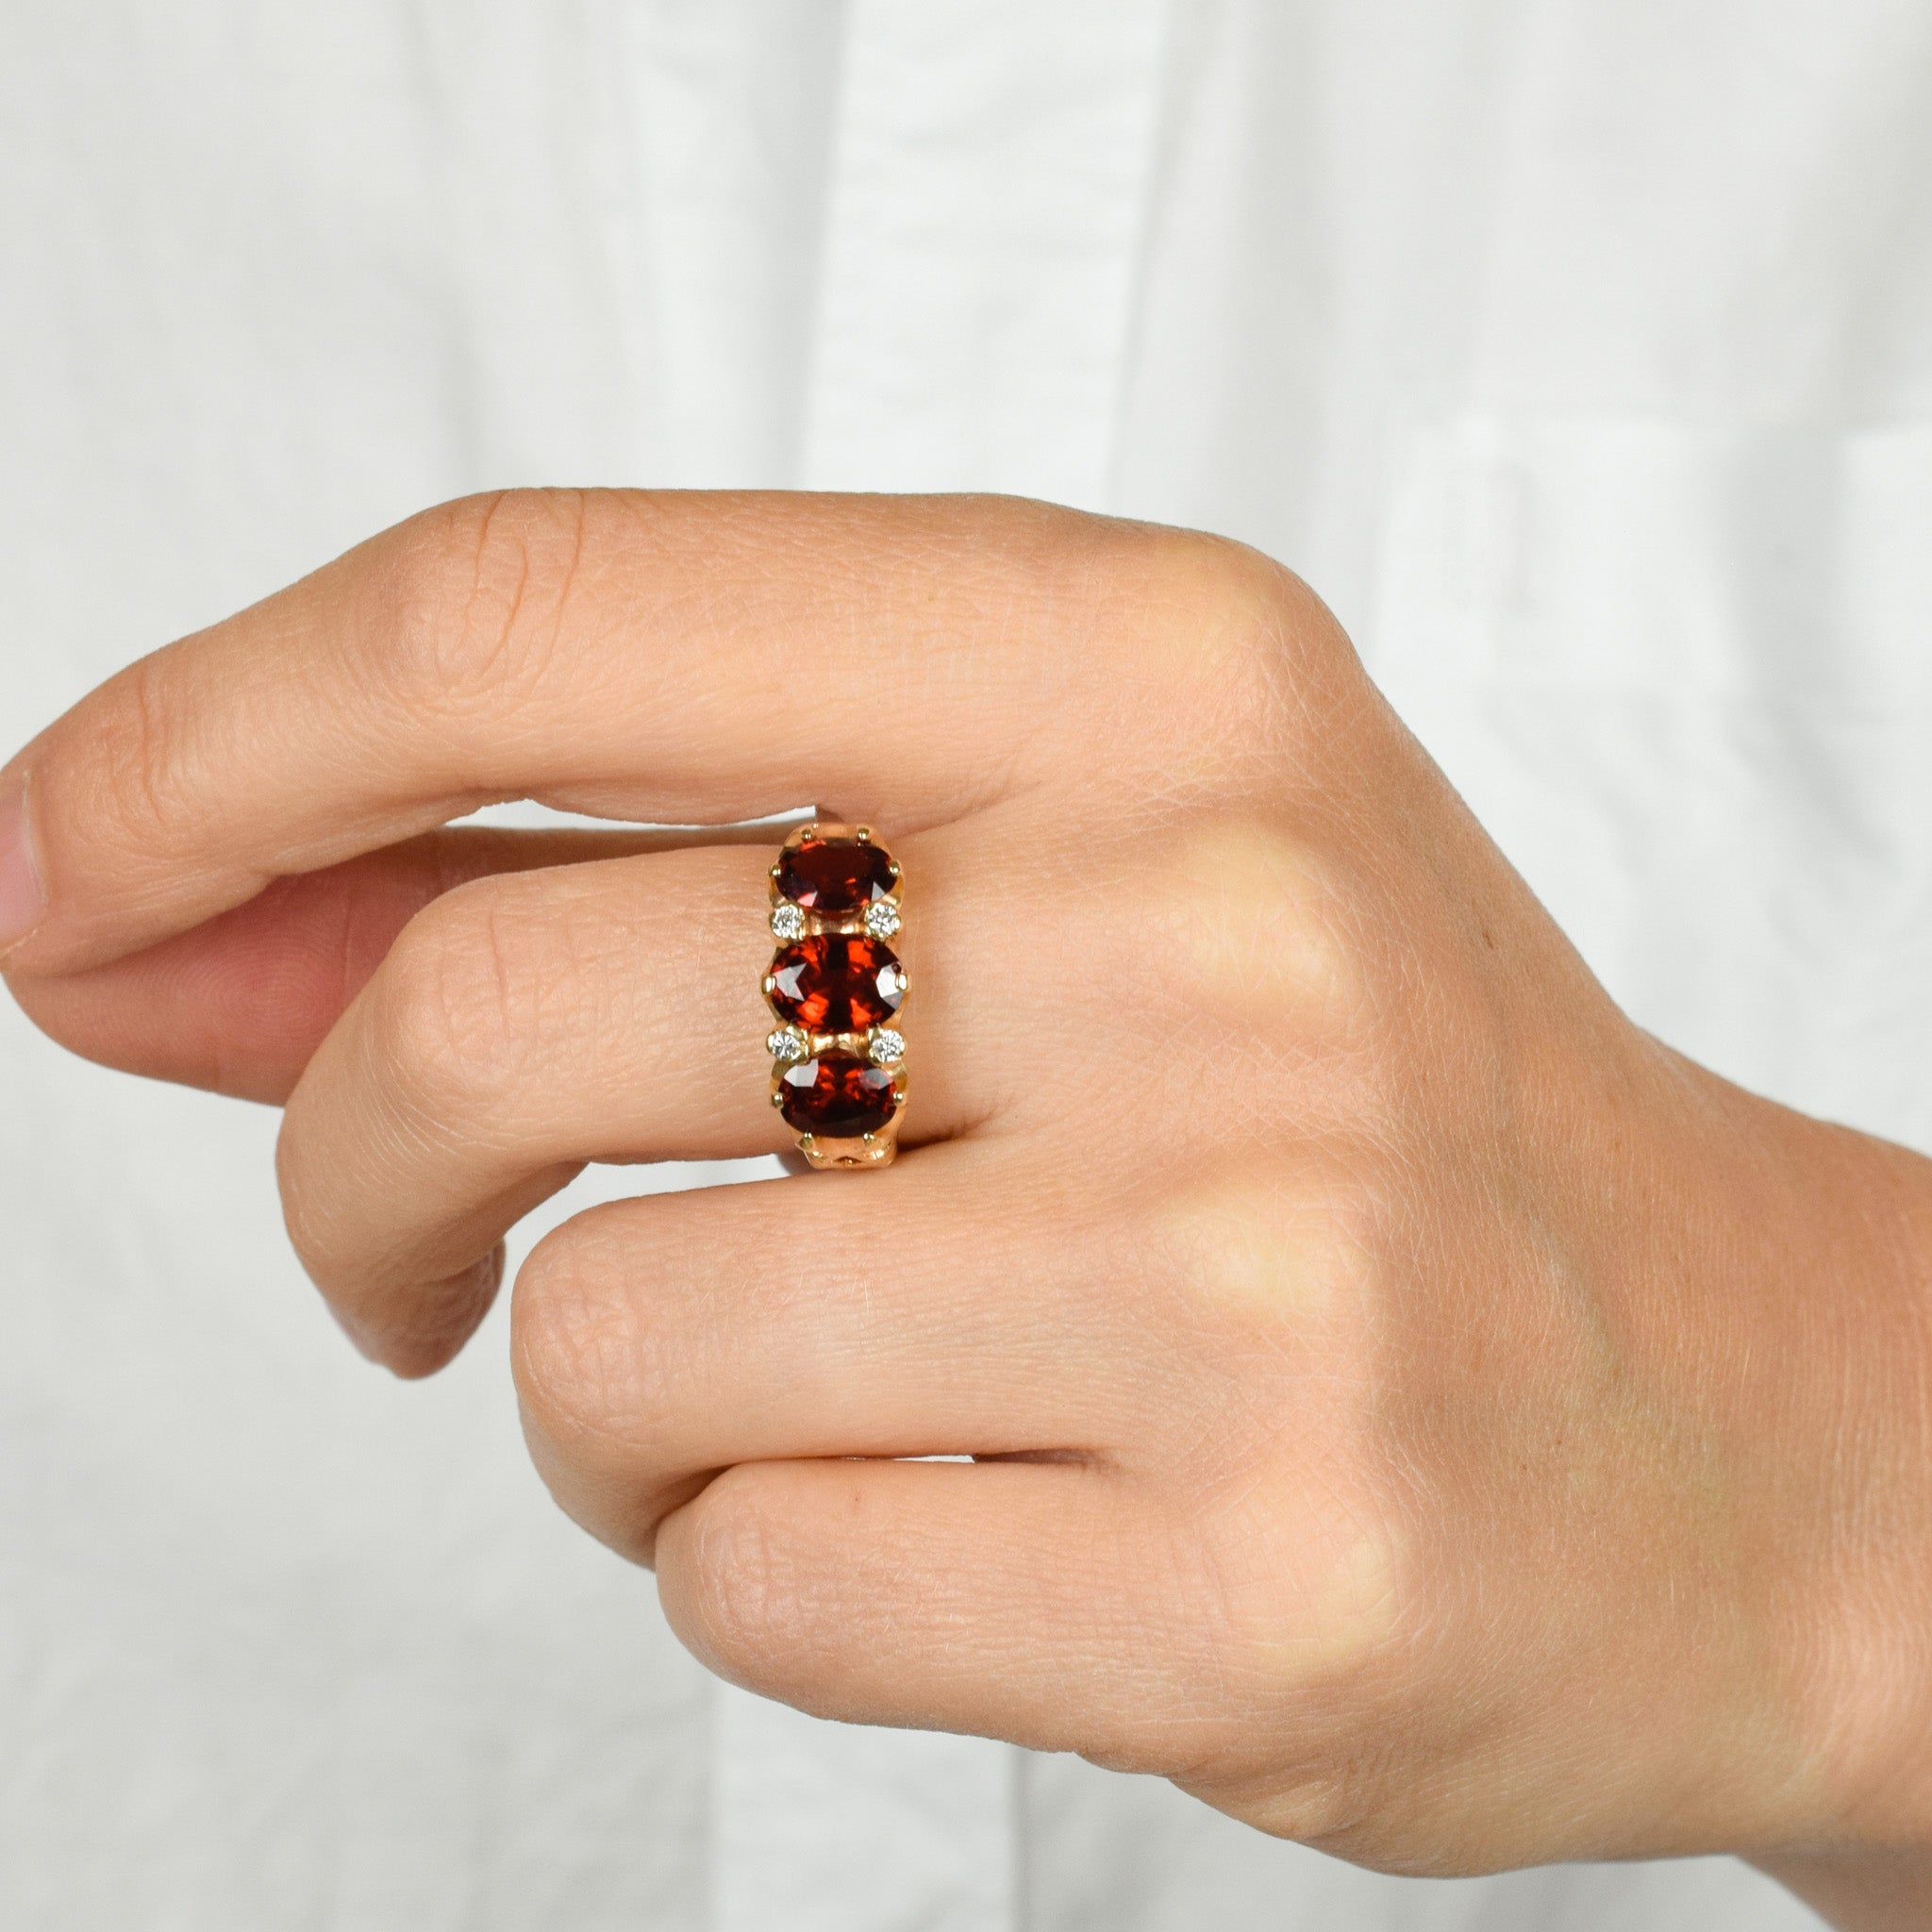 Ethereal Garnet and Diamond Trilogy Ring